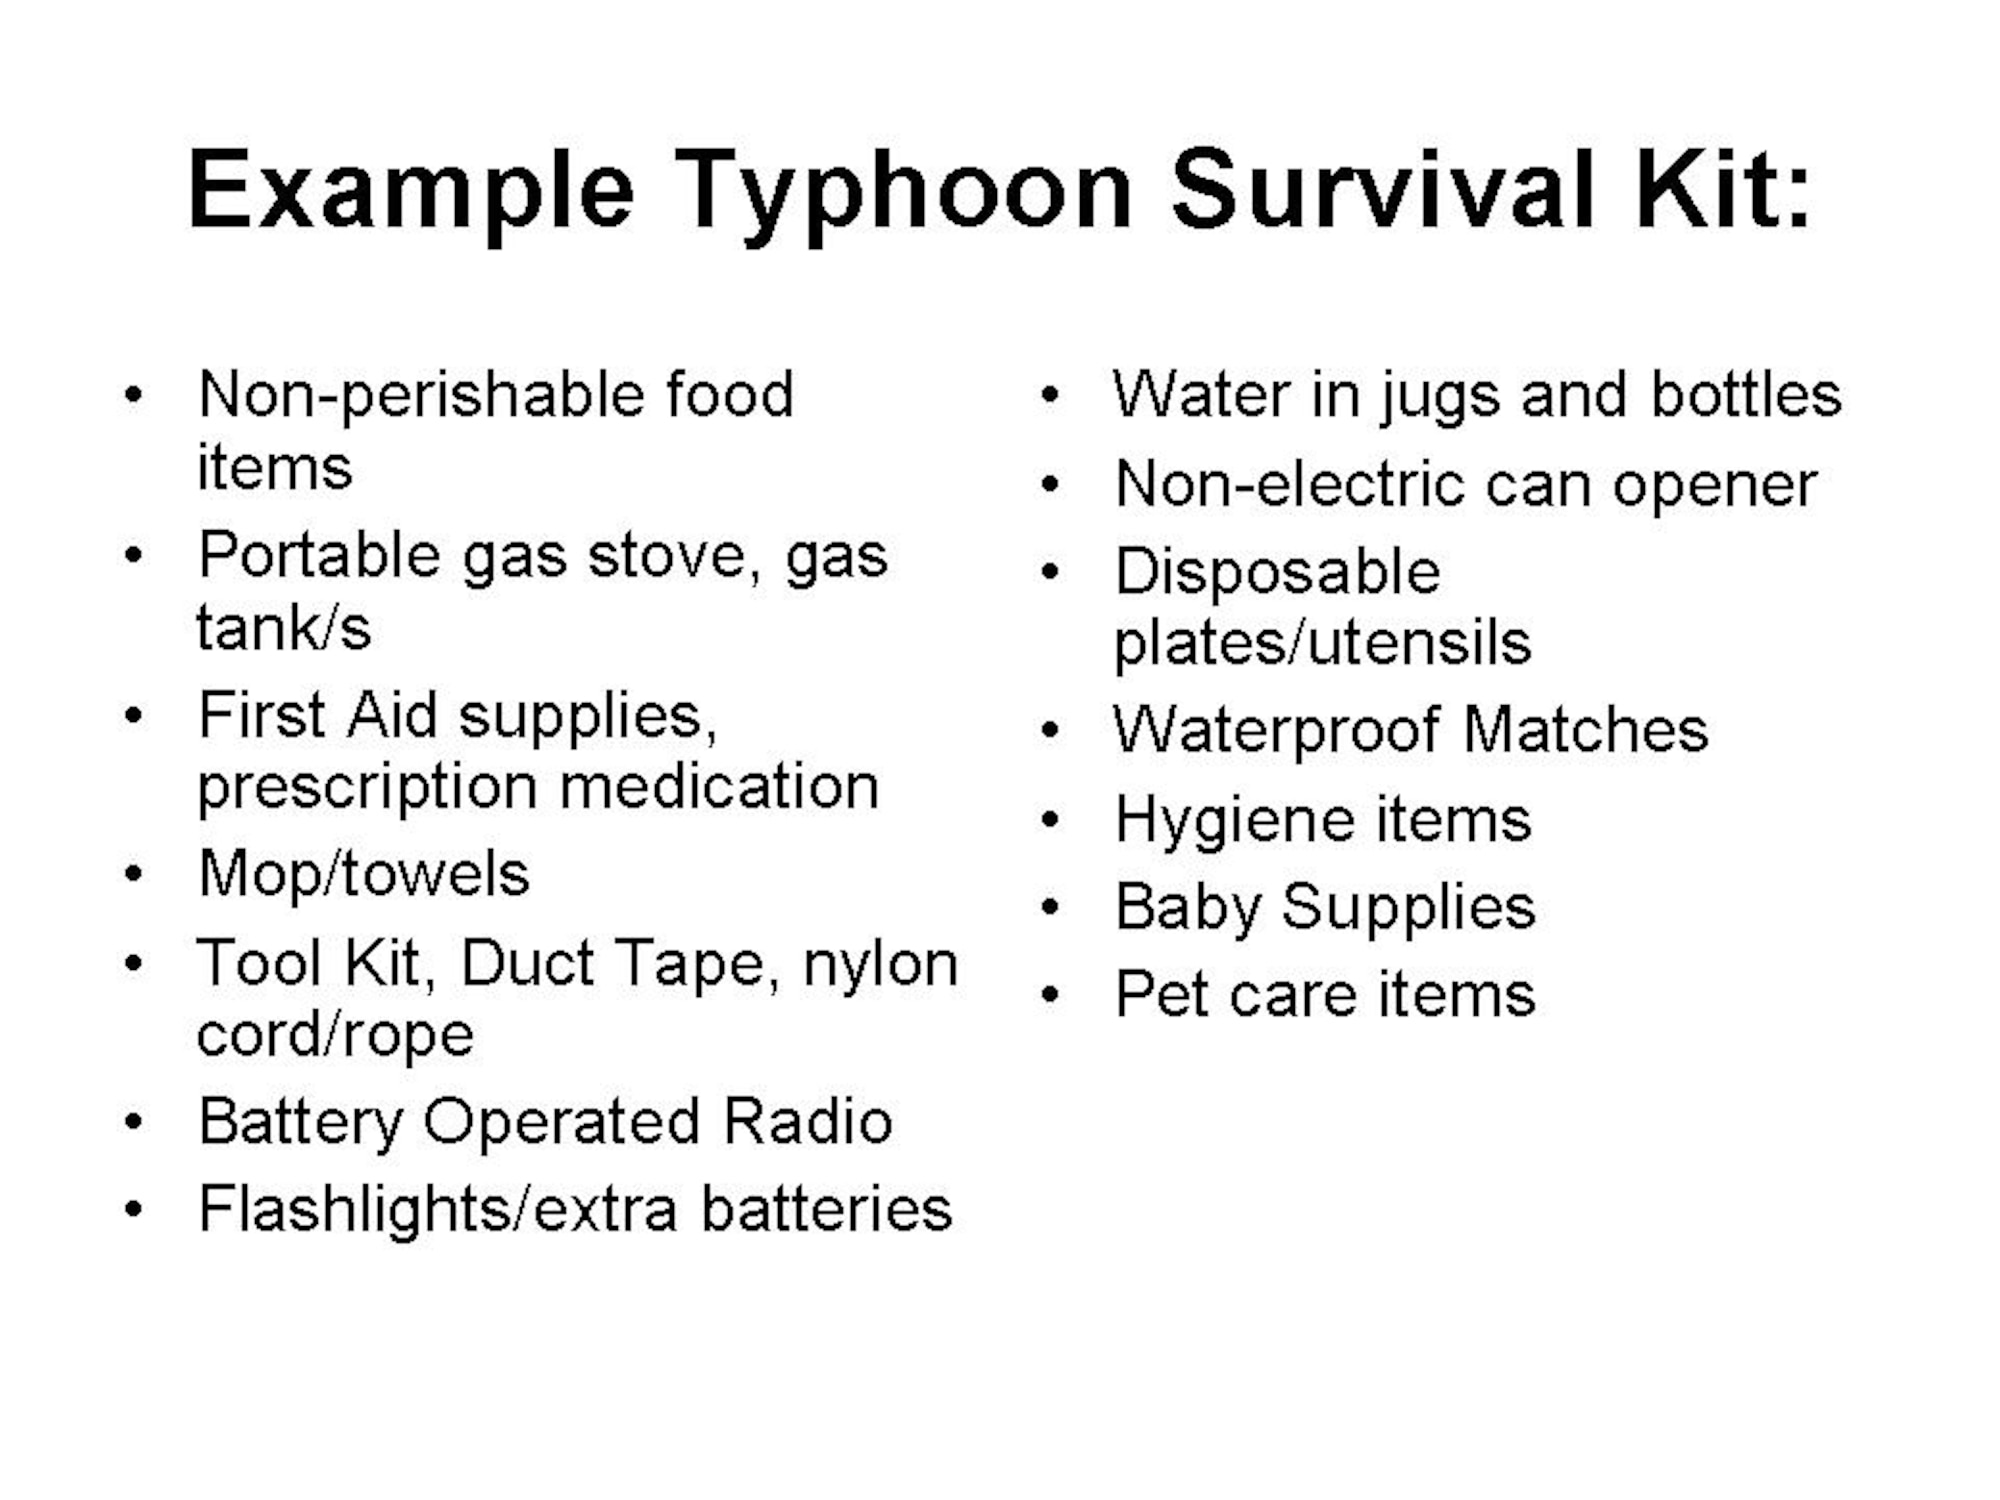 Be advised, when a tropical storm or typhoon threatens Guam, availability of emergency supplies may become limited in a short span of time. 